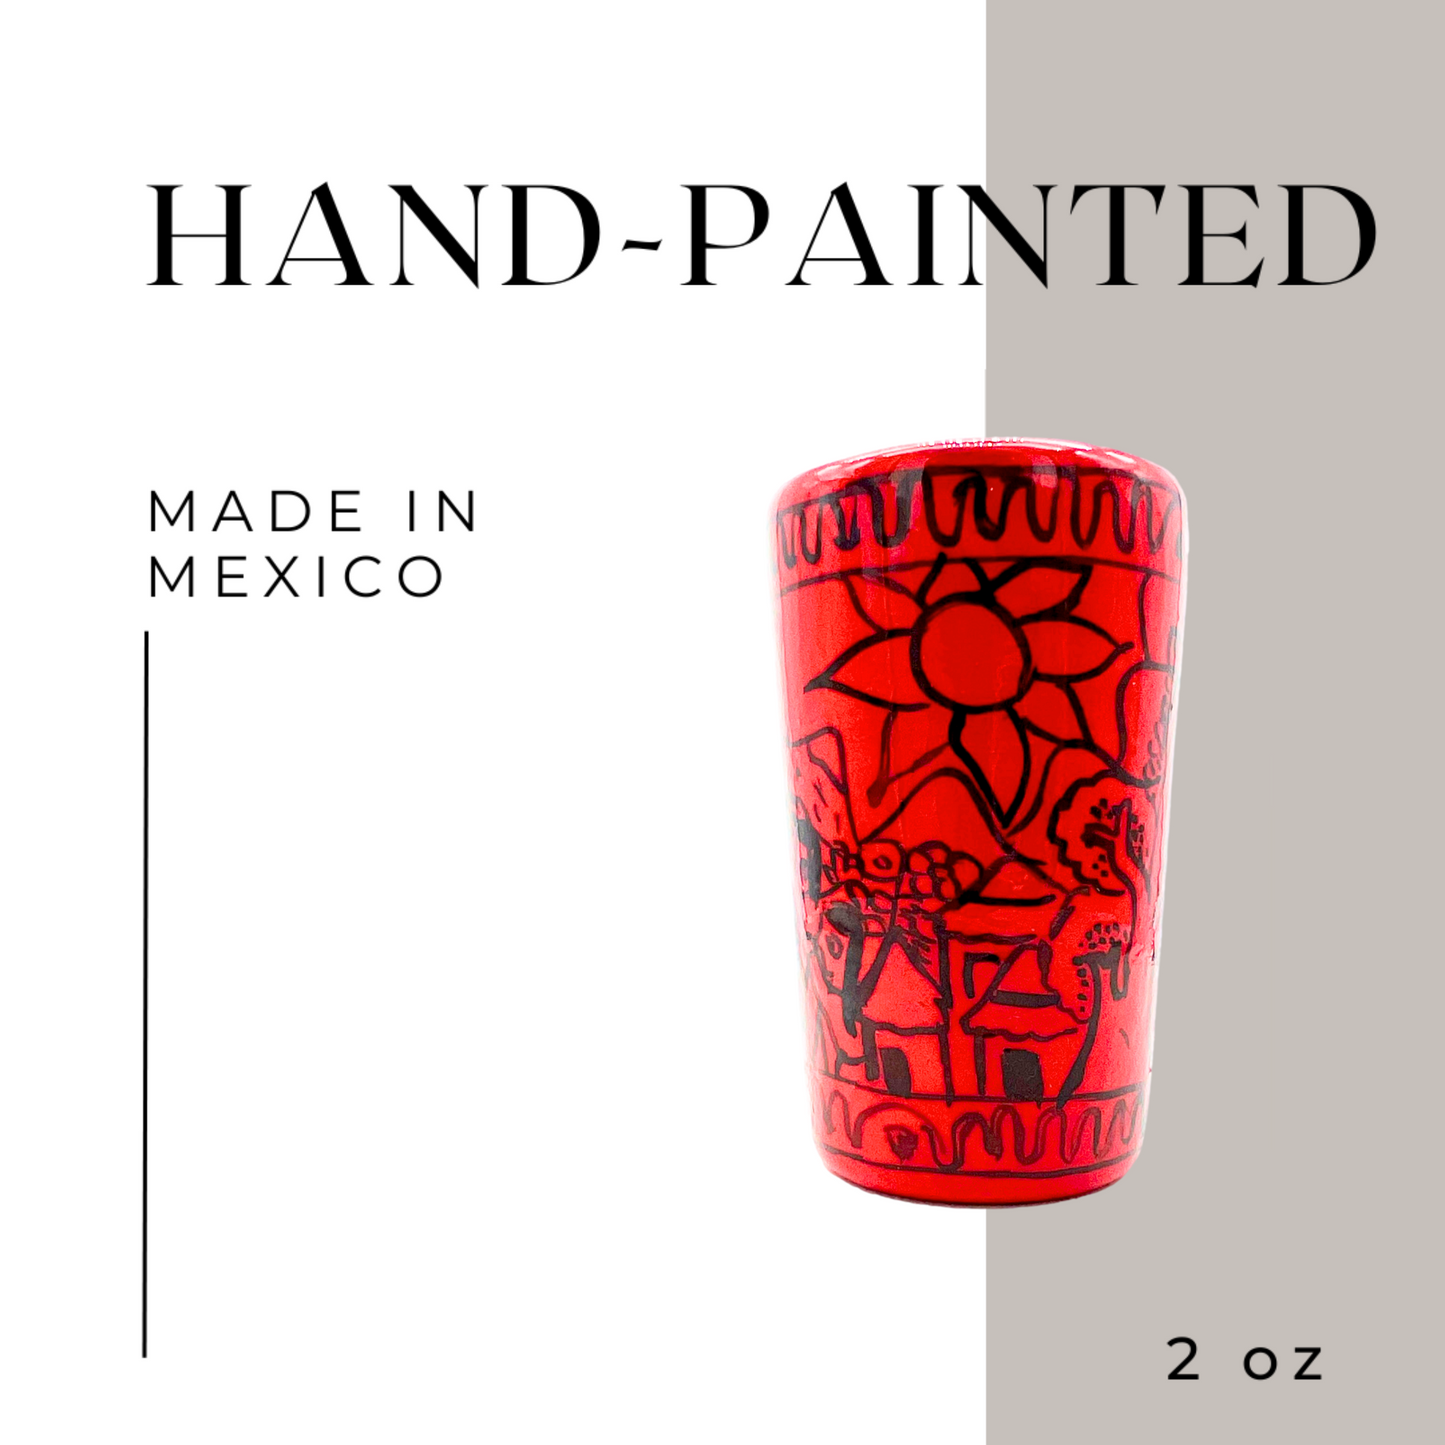 hand painted red mexican shot glasses set of 2. handmade and handpainted in mexico 2 ounces each shot caballito